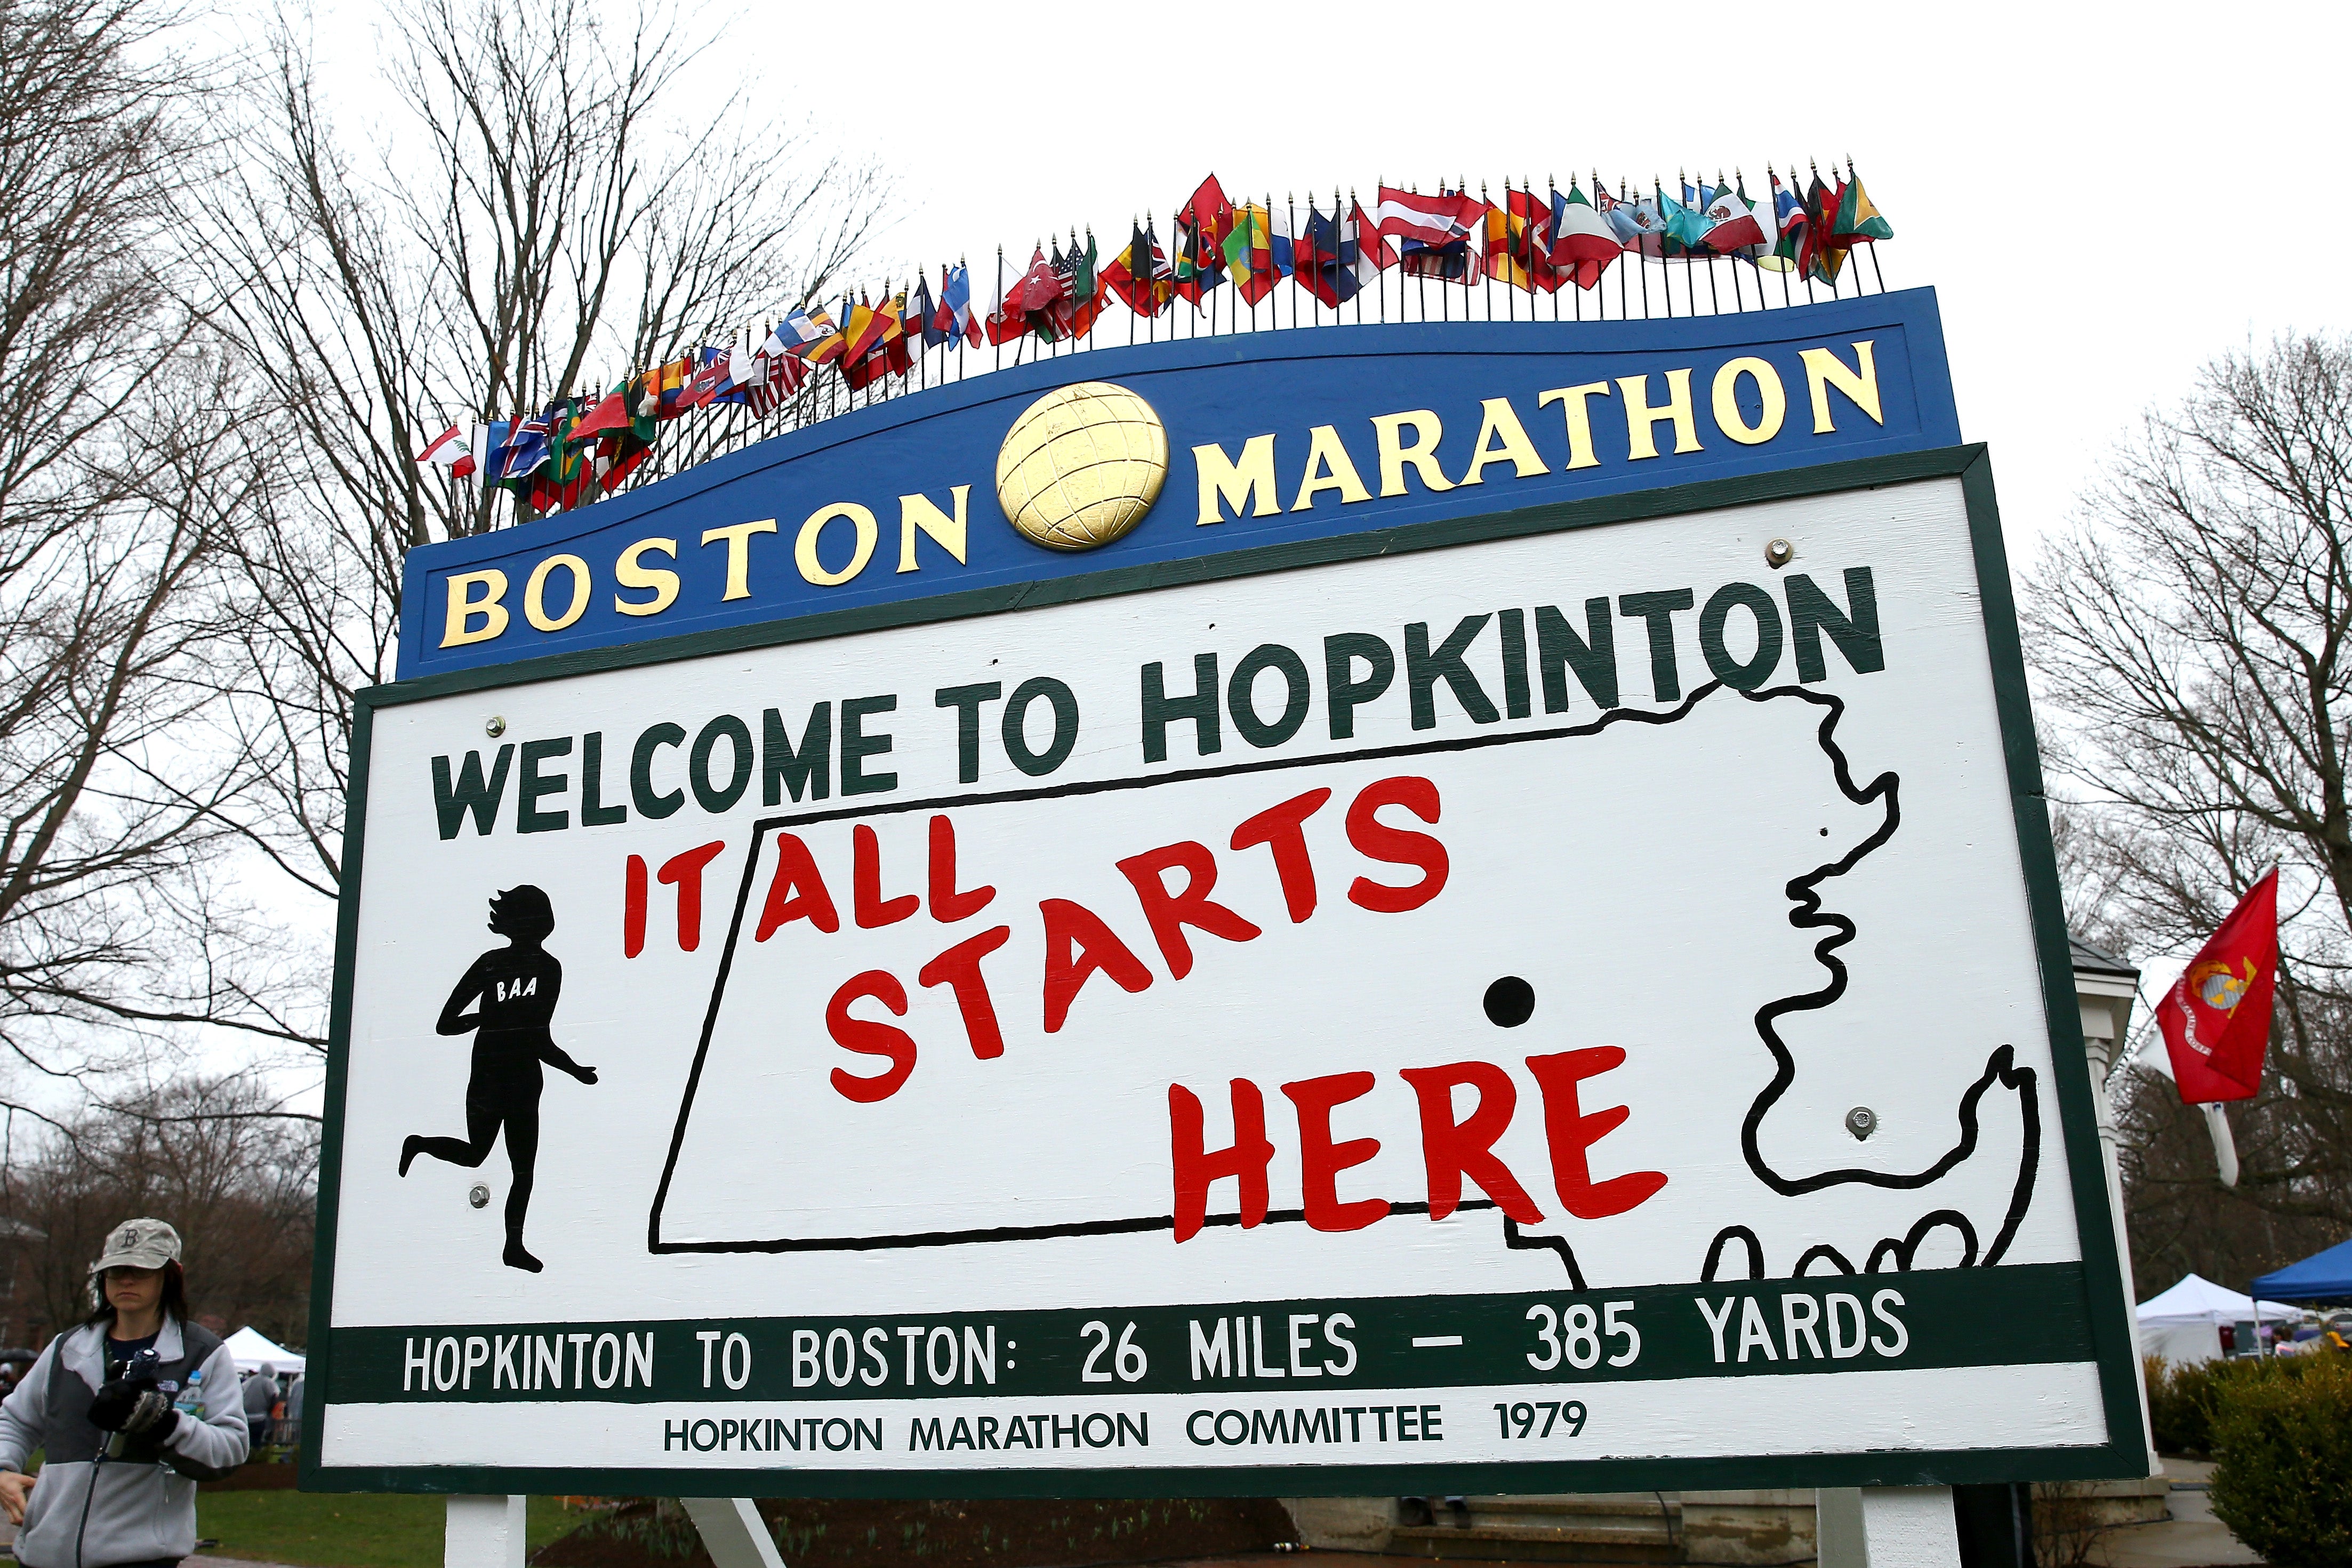 A view of a sign stating "It All Starts Here" near the start of the Boston marathaon in Hopkinton, Masachusetts, where a teen girl was found dead, hanging from a tree last month.